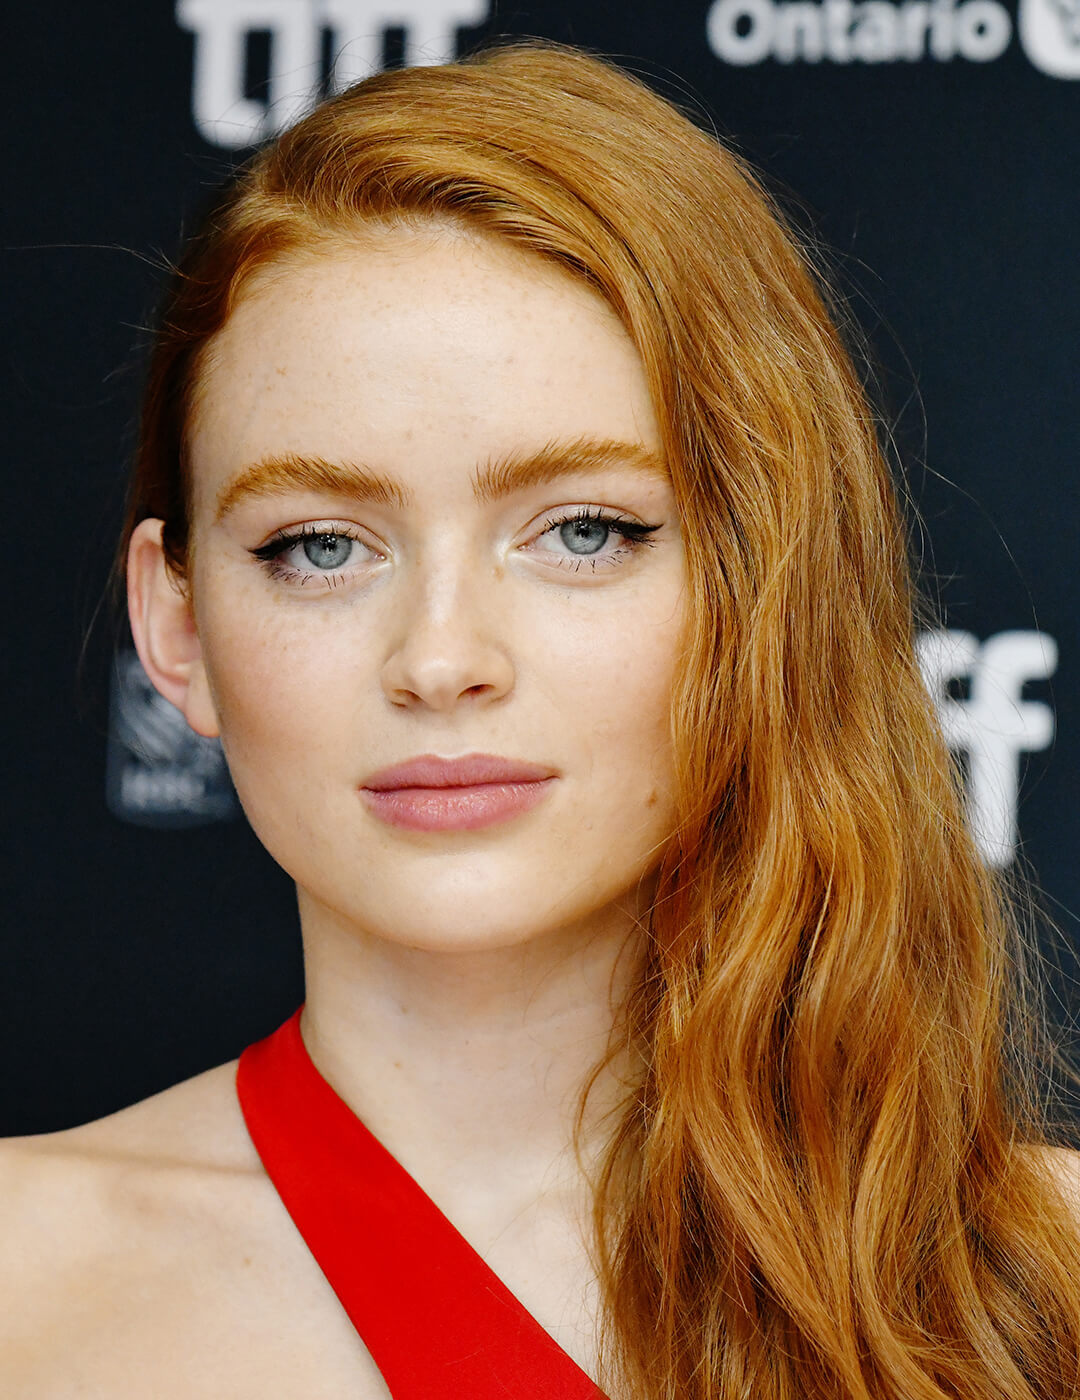 Sadie Sink rocking a side-parted hairstyle